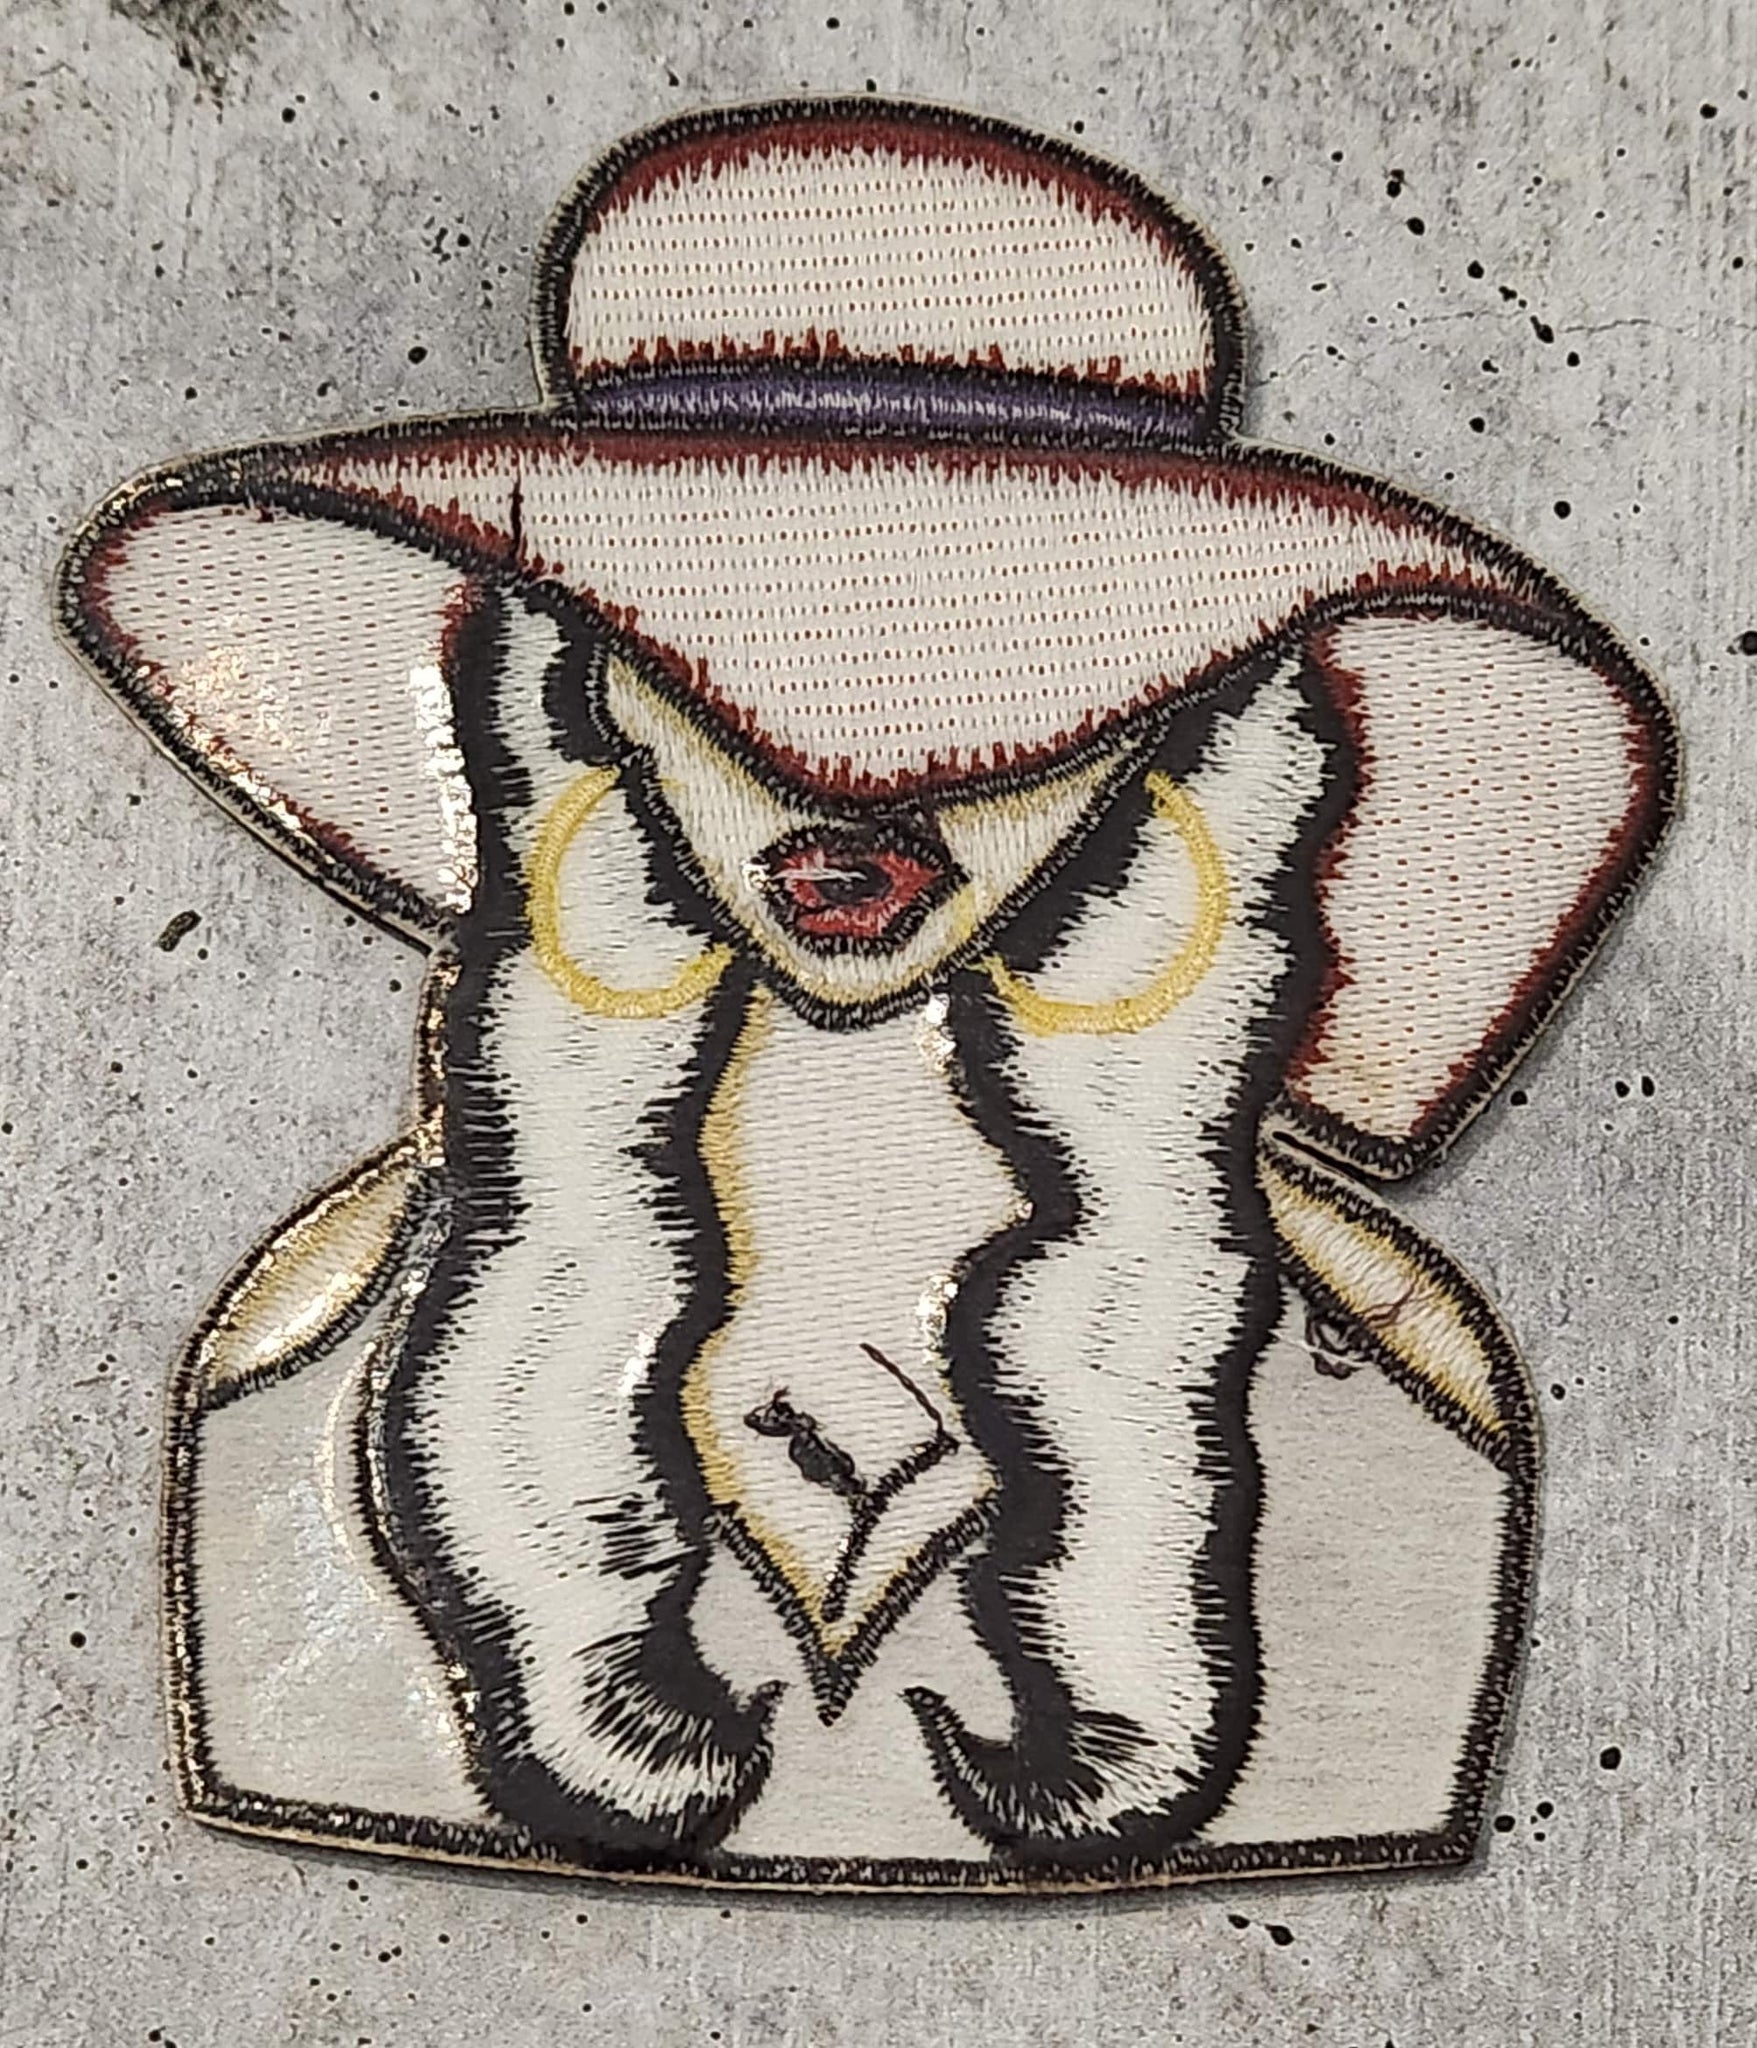 New, 1-pc "Fedora Cutie", Size 4", Iron-on Embroidered Patch for Shoes, Phone Cases, Makeup Bags, Clothing, Hats, Jackets and Accessories